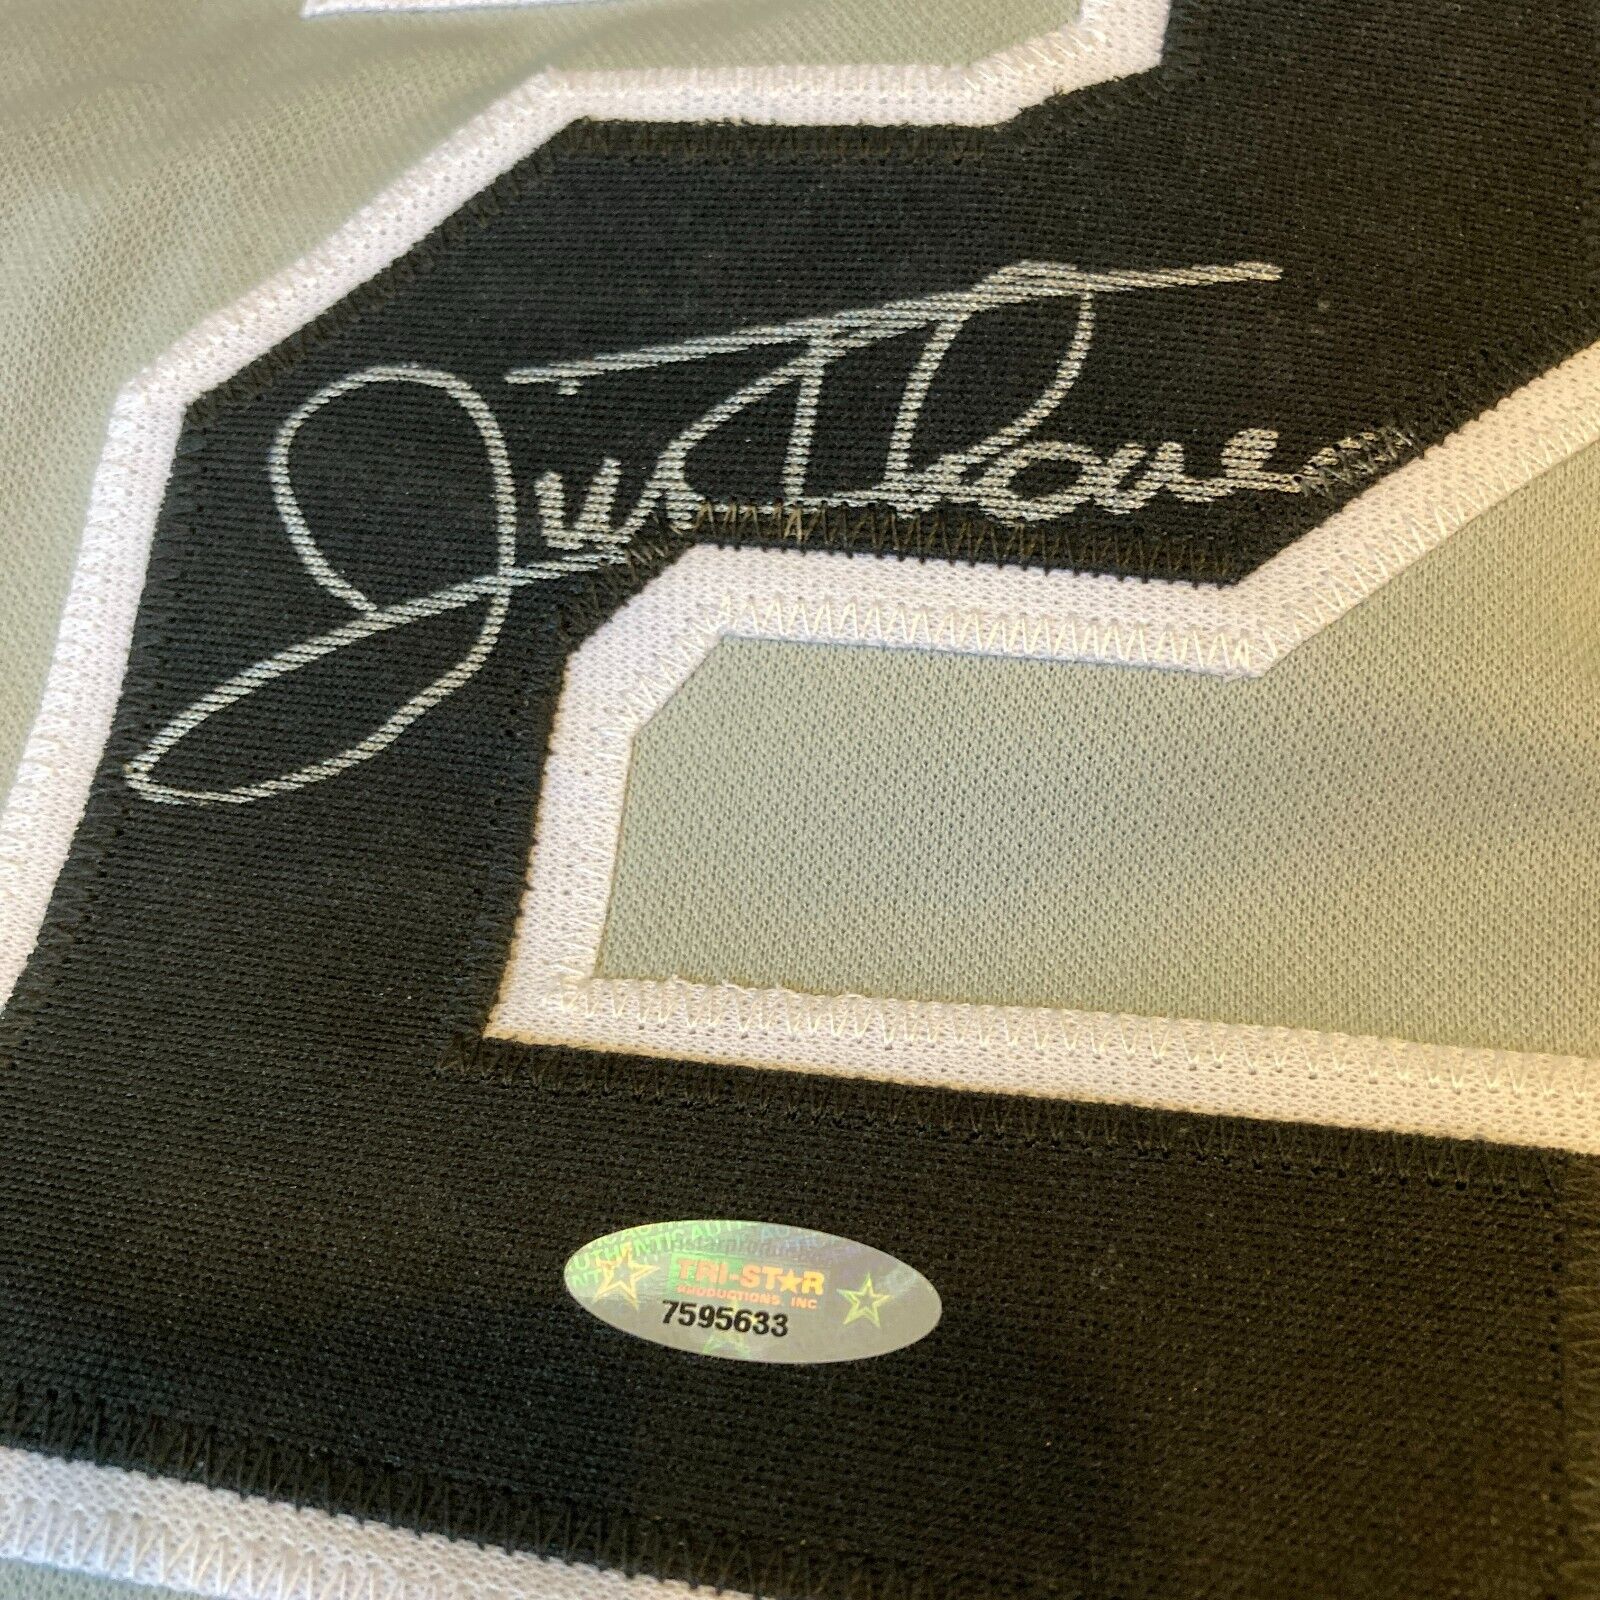 Jim Thome Signed Chicago White Sox Jersey PSA DNA COA